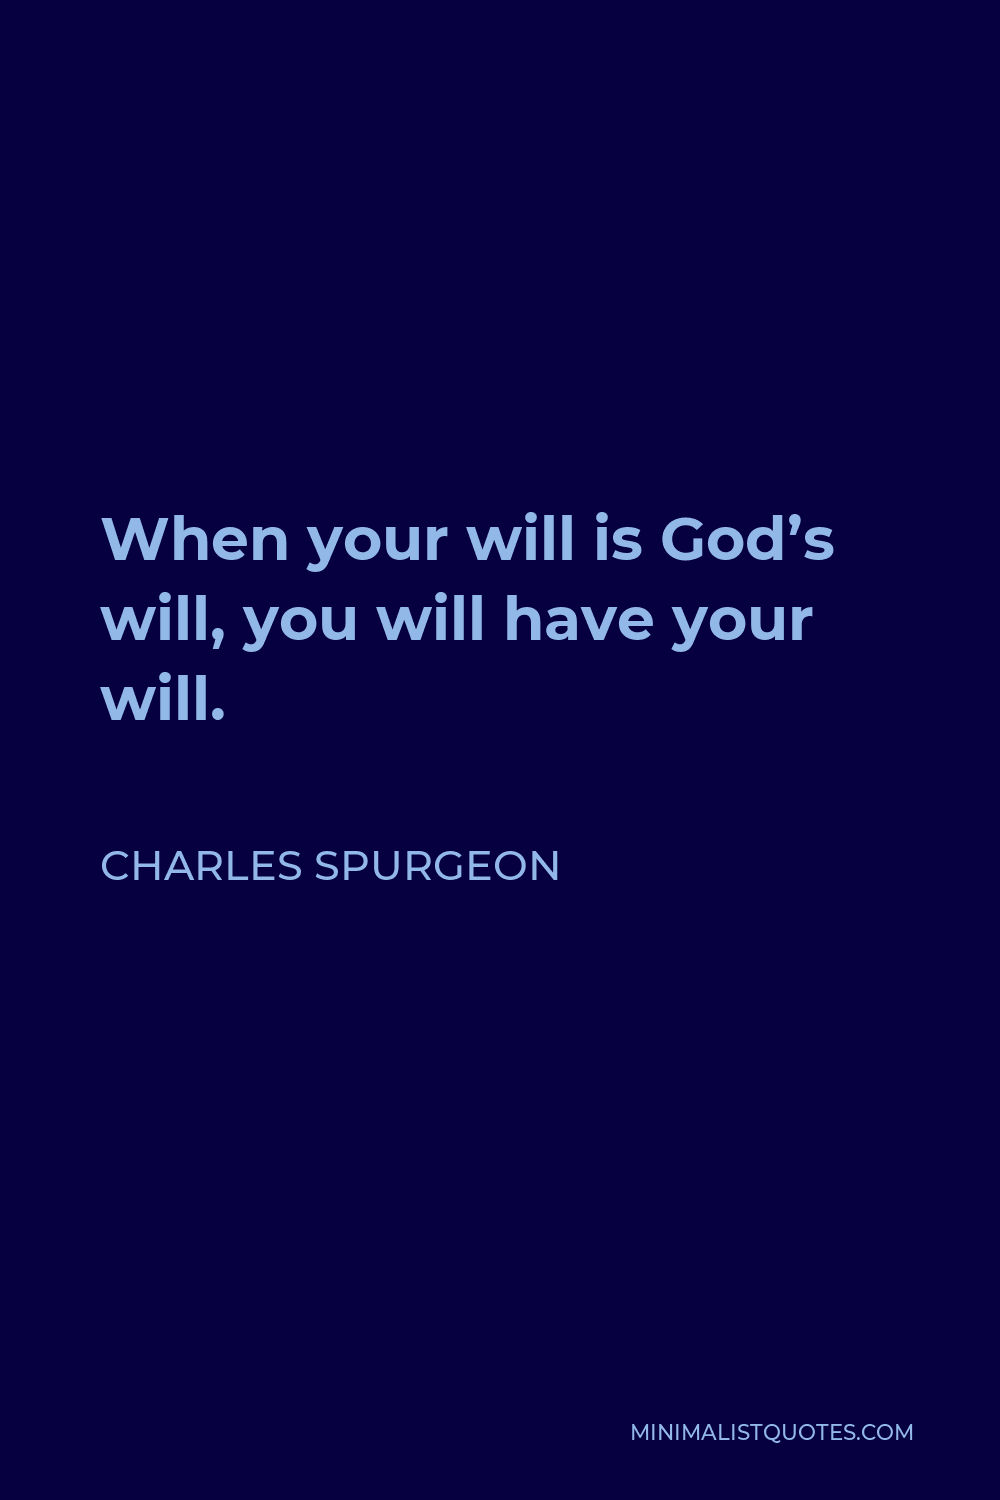 Charles Spurgeon Quote - When your will is God’s will, you will have your will.